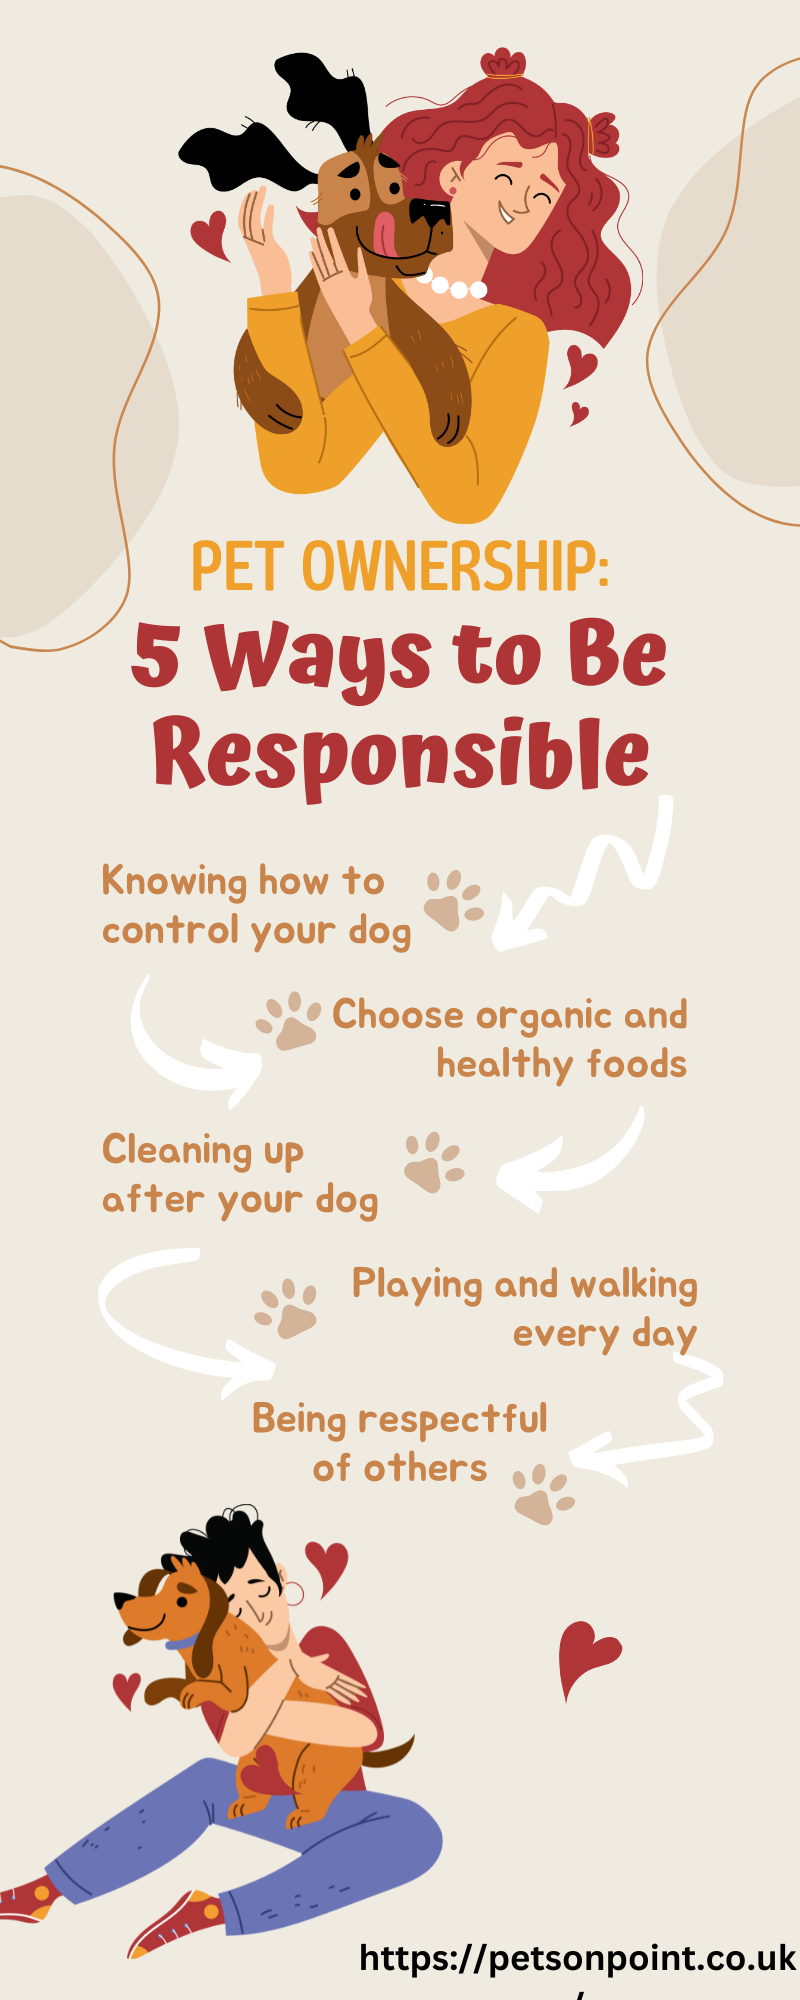 5 Ways to Be
Responsible

Knowing how to
control your dog

Choose organic and
healthy foods

Cleaning up
after your dog

Playing and walking
every day

Being respectful
of others

  

https://petsonpoint.co.uk